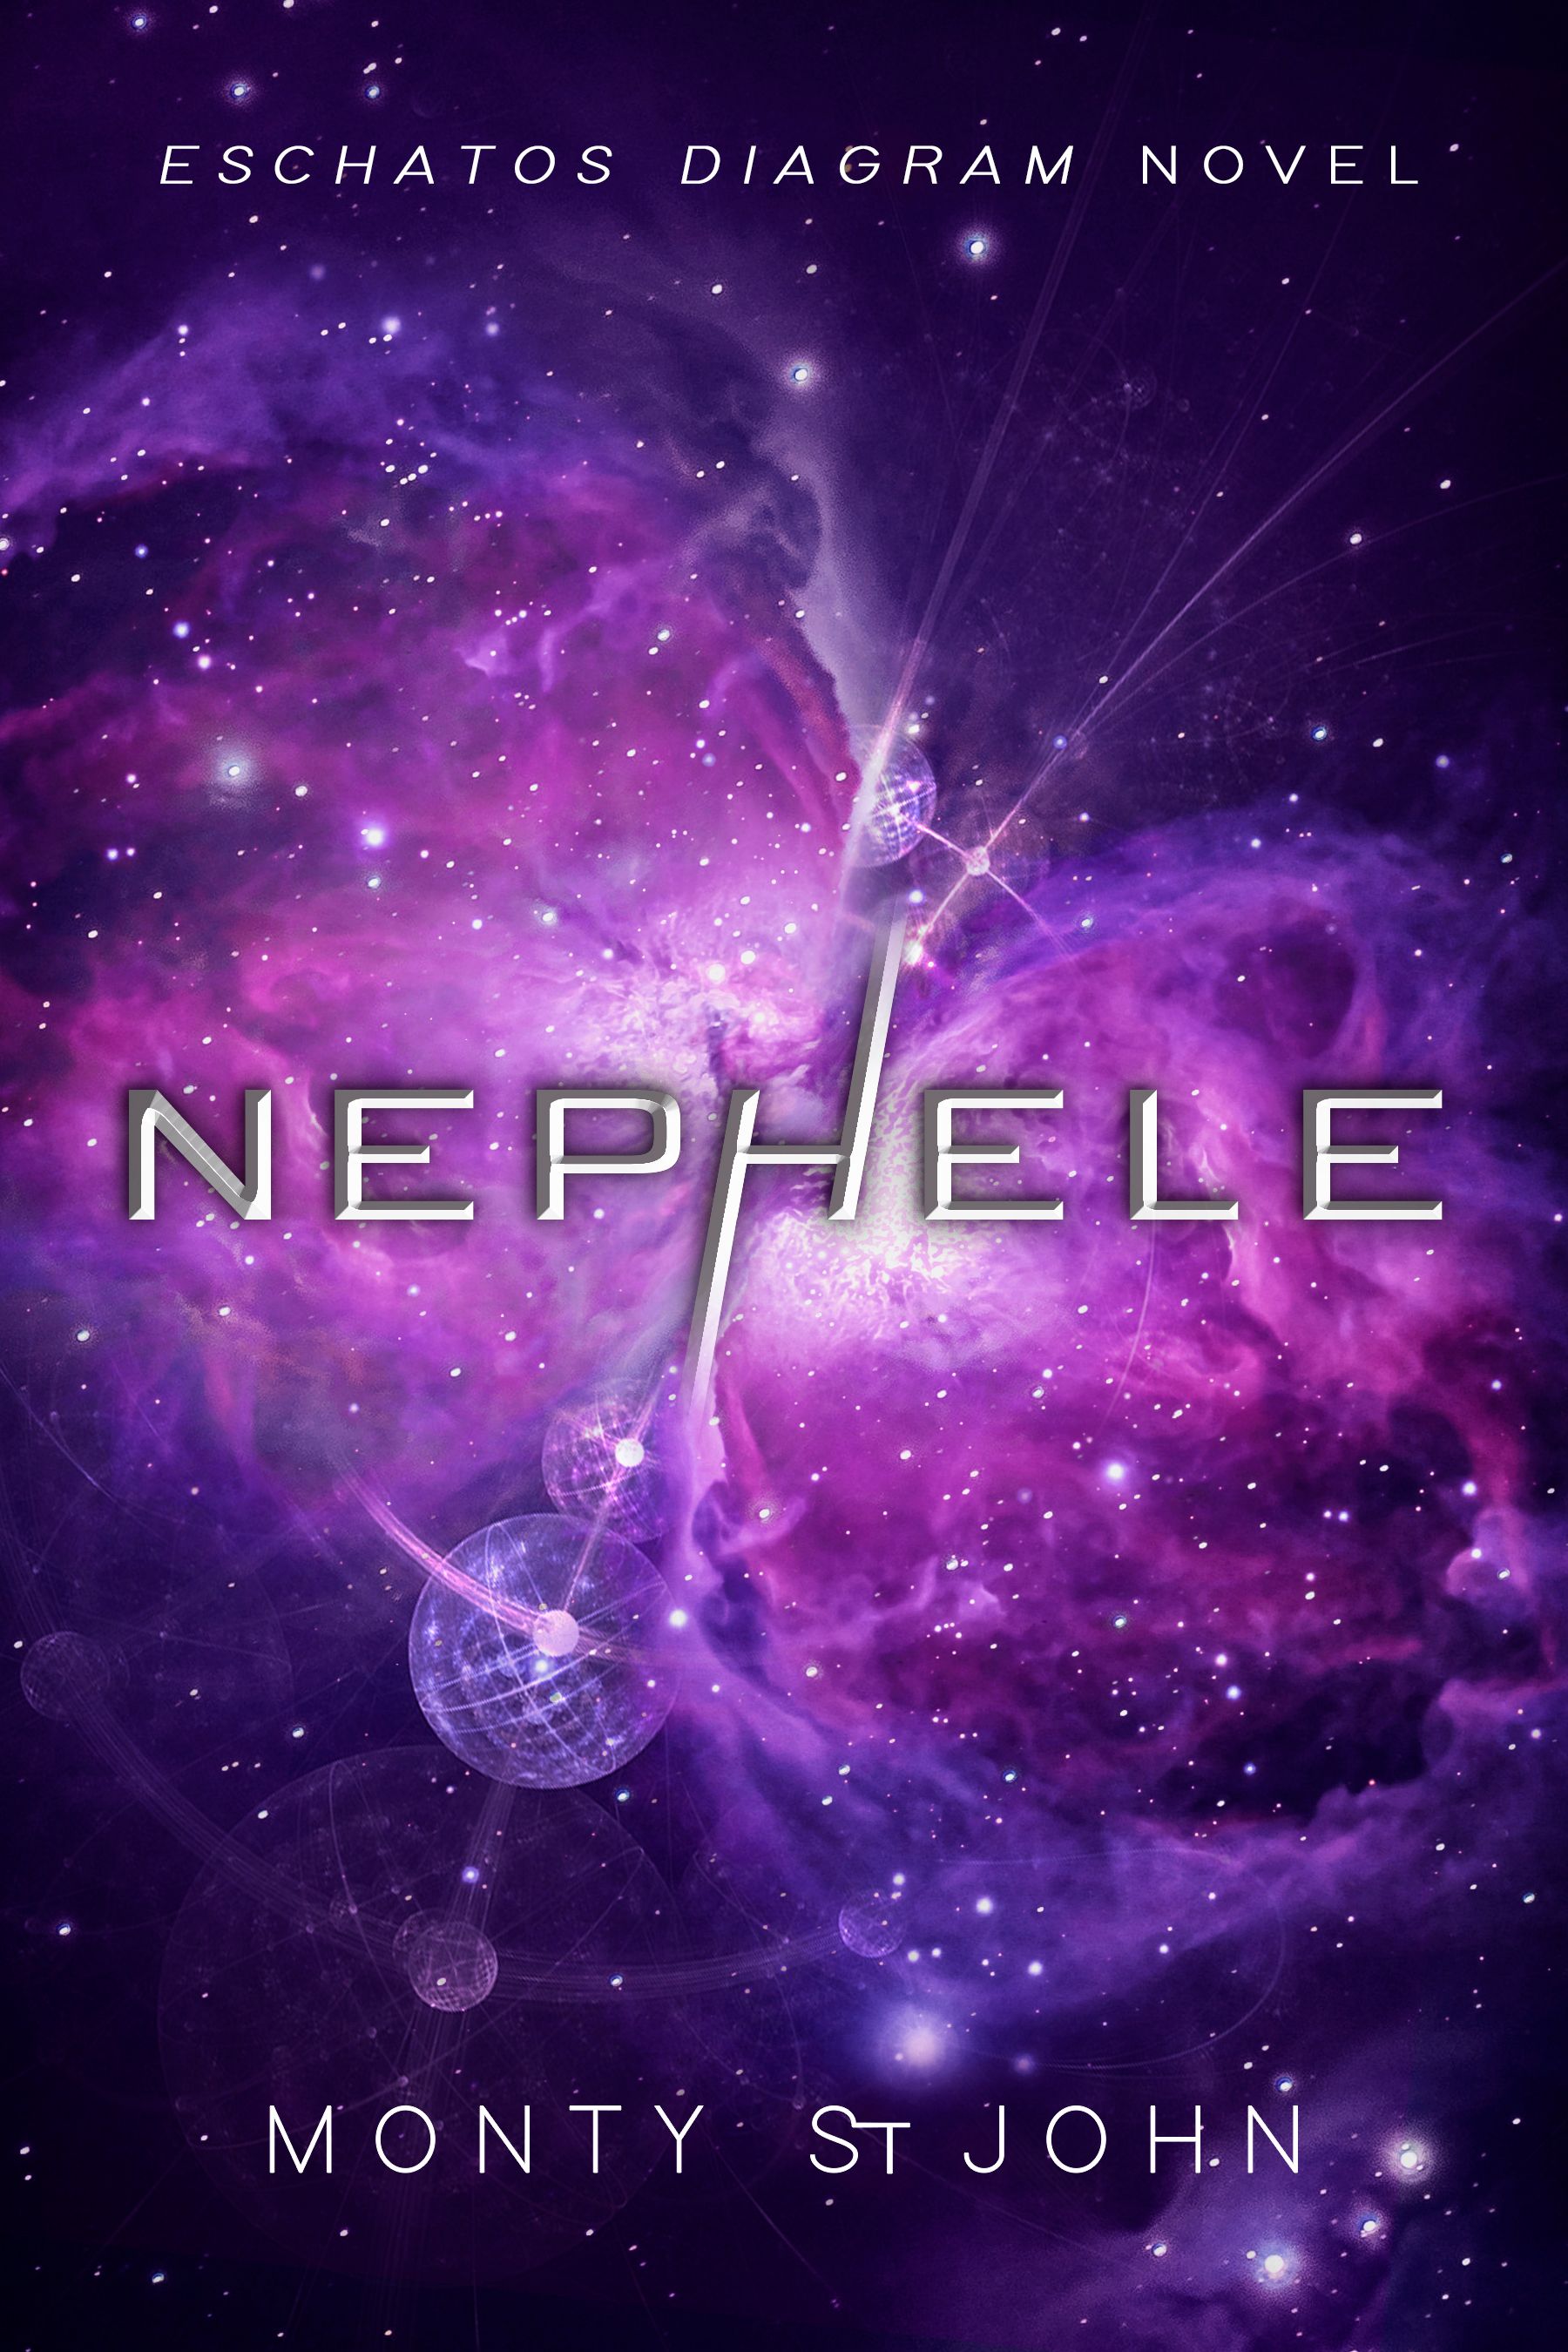 NEPHELE-Preview-Cover-Book-2-1